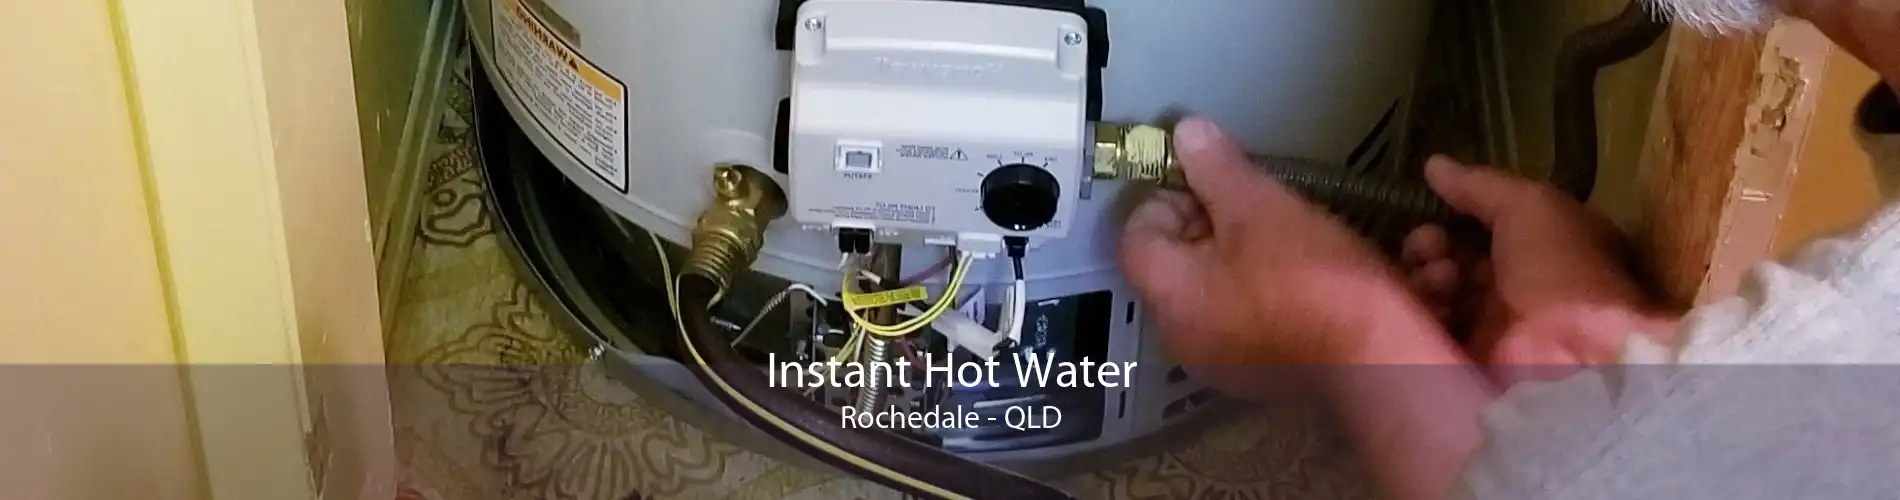 Instant Hot Water Rochedale - QLD